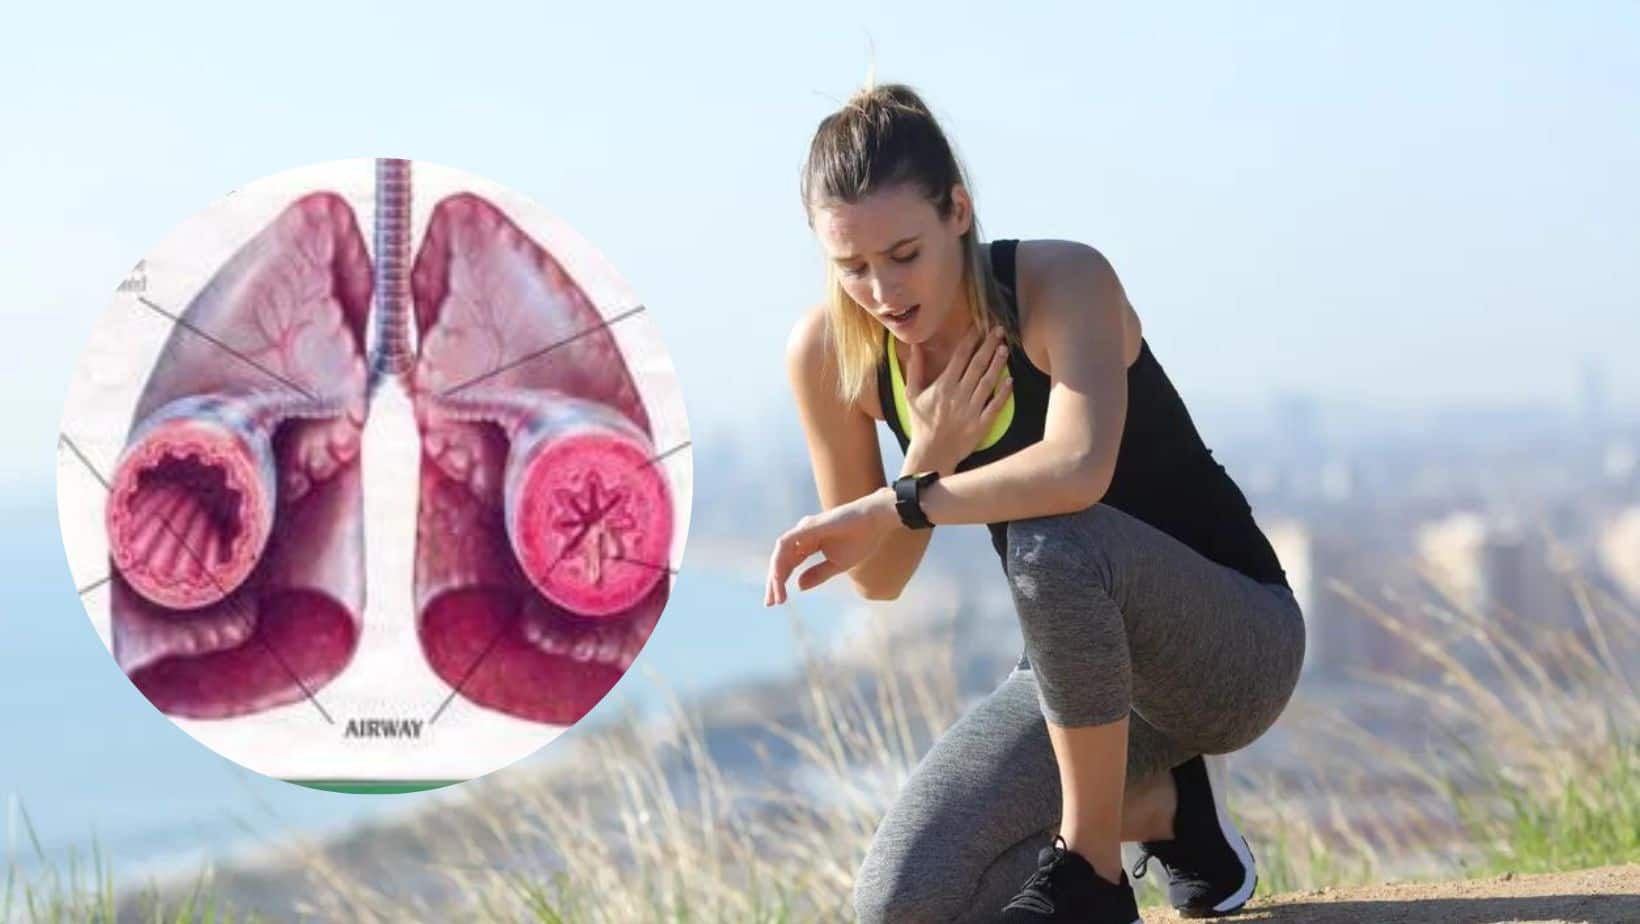 Exercise-Induced Bronchoconstriction: Breathing Difficulty After A Run Could Be A Warning Symptom of Exercise Induced Asthma